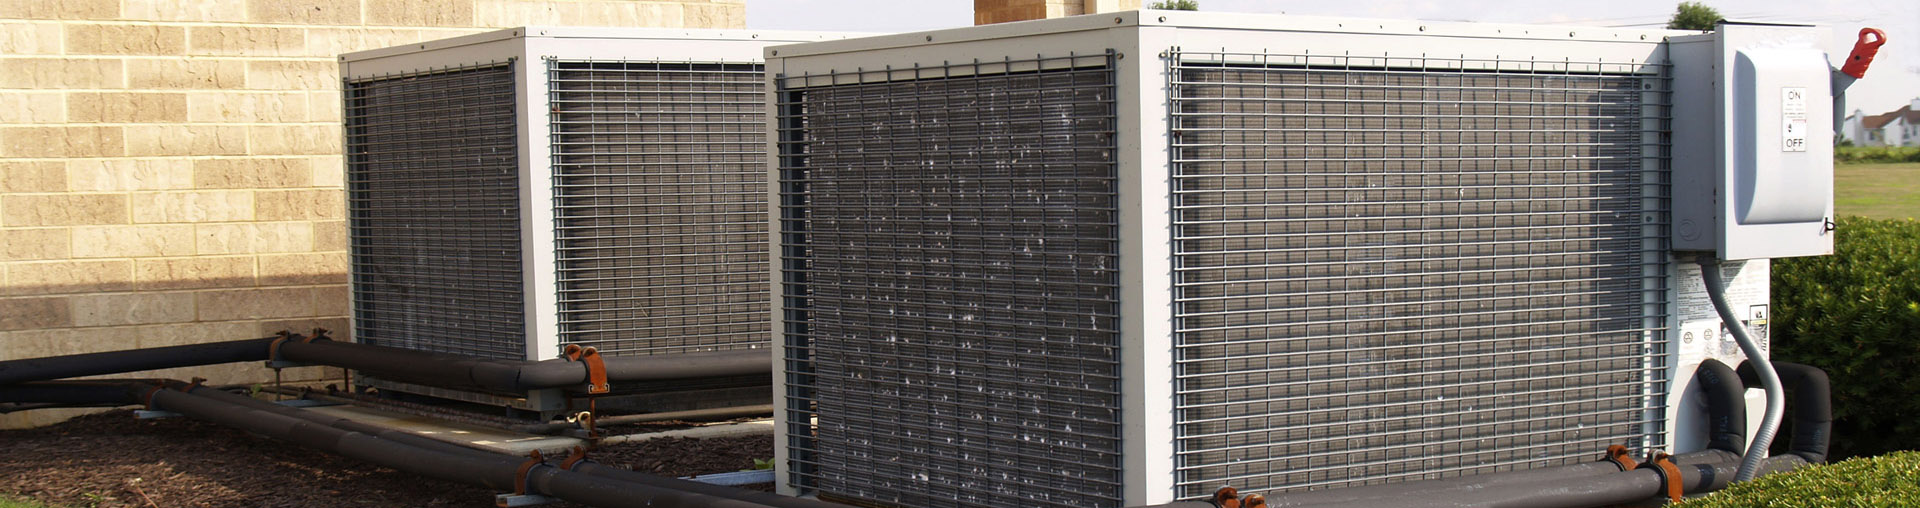 hvac montgomery, Top HVAC Contractor in Montgomery, TX: Heating and Air Conditioning Services